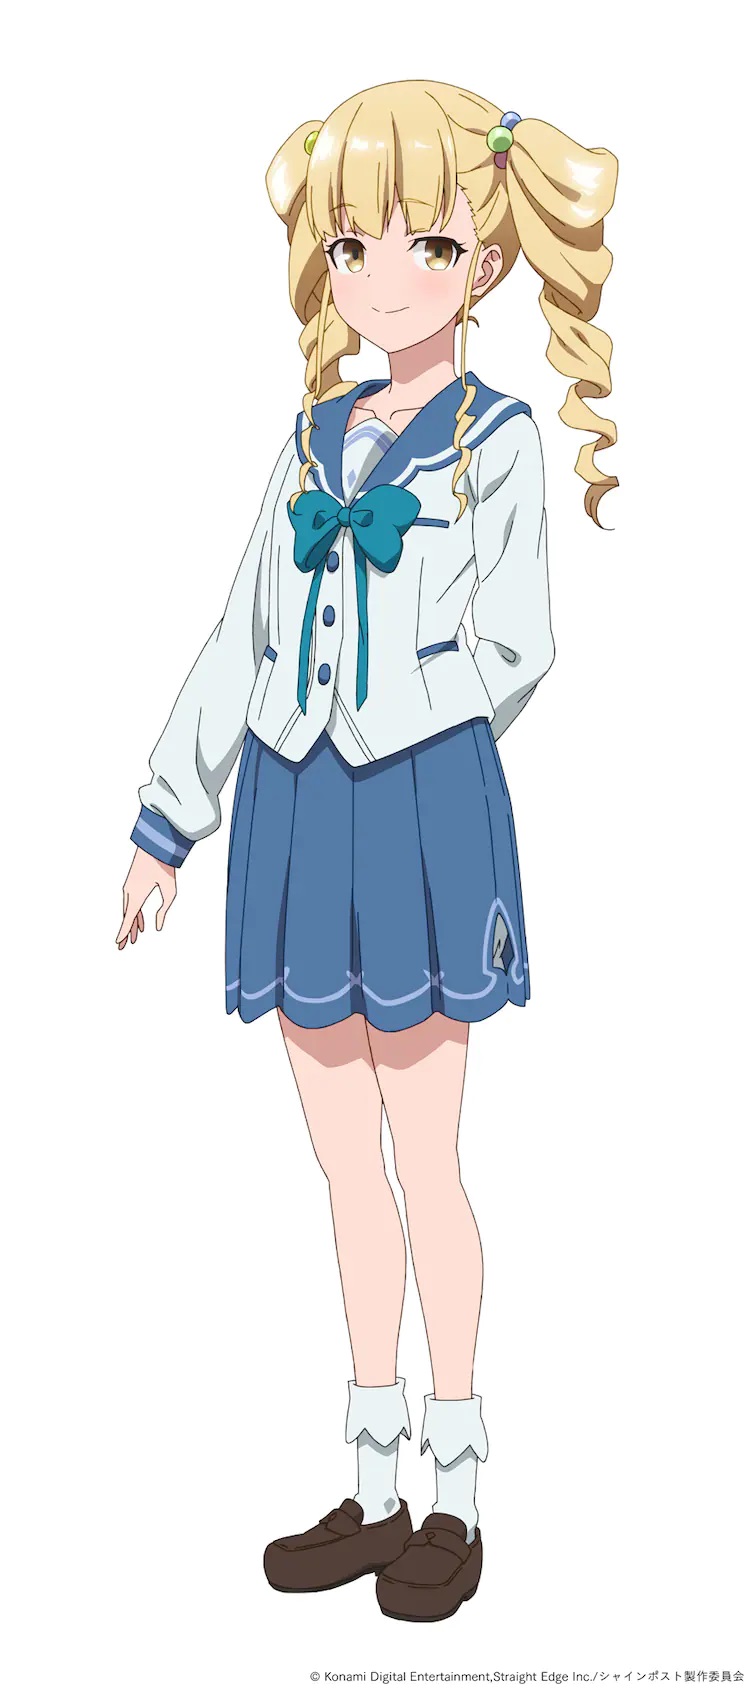 A character setting of Homare Torawatari from the upcoming SHINE POST TV anime. Homare is a high school girl with blonde hair in twin-tails and yellow eyes. She wears a school uniform and smile demurely while posing with one hand behind her back.